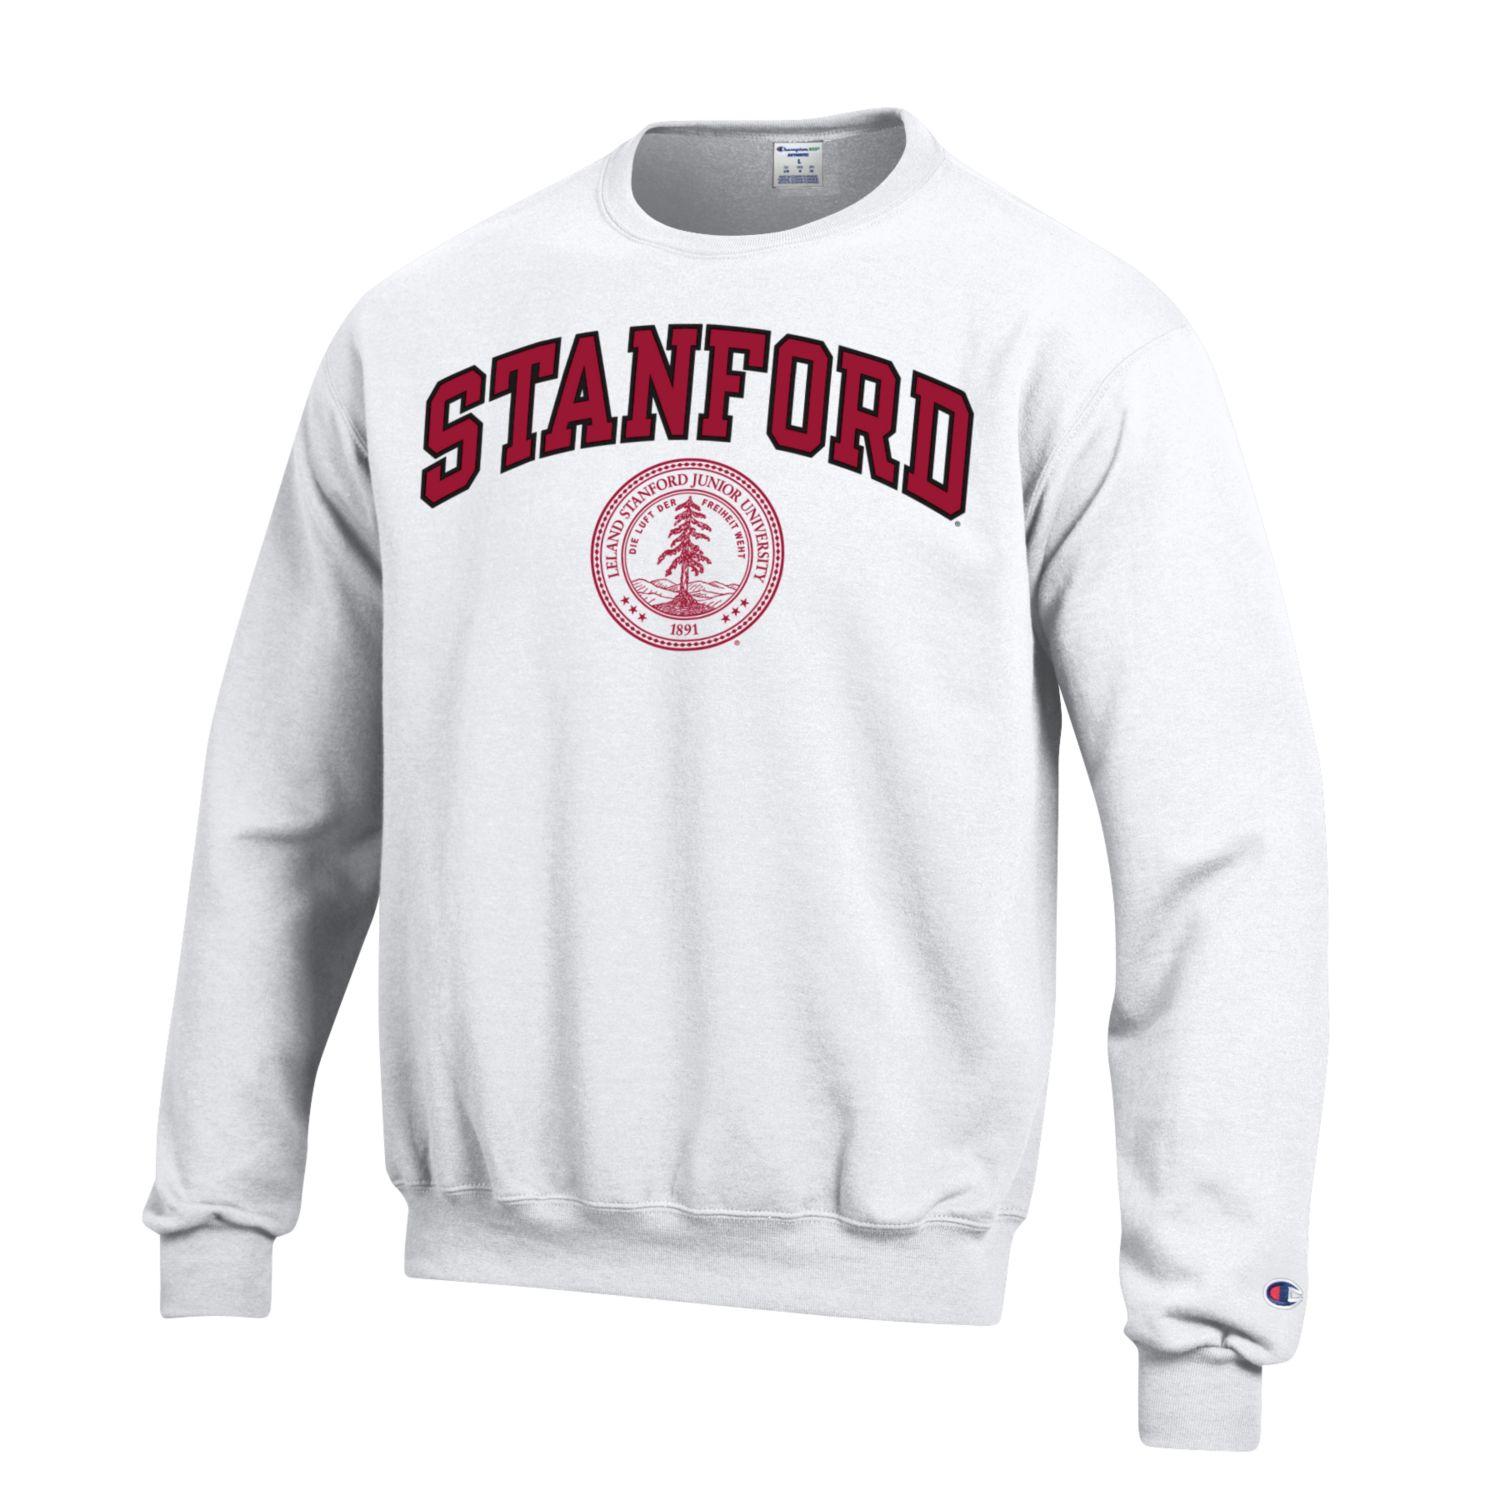  Stanford University Official Cardinal Unisex Youth T